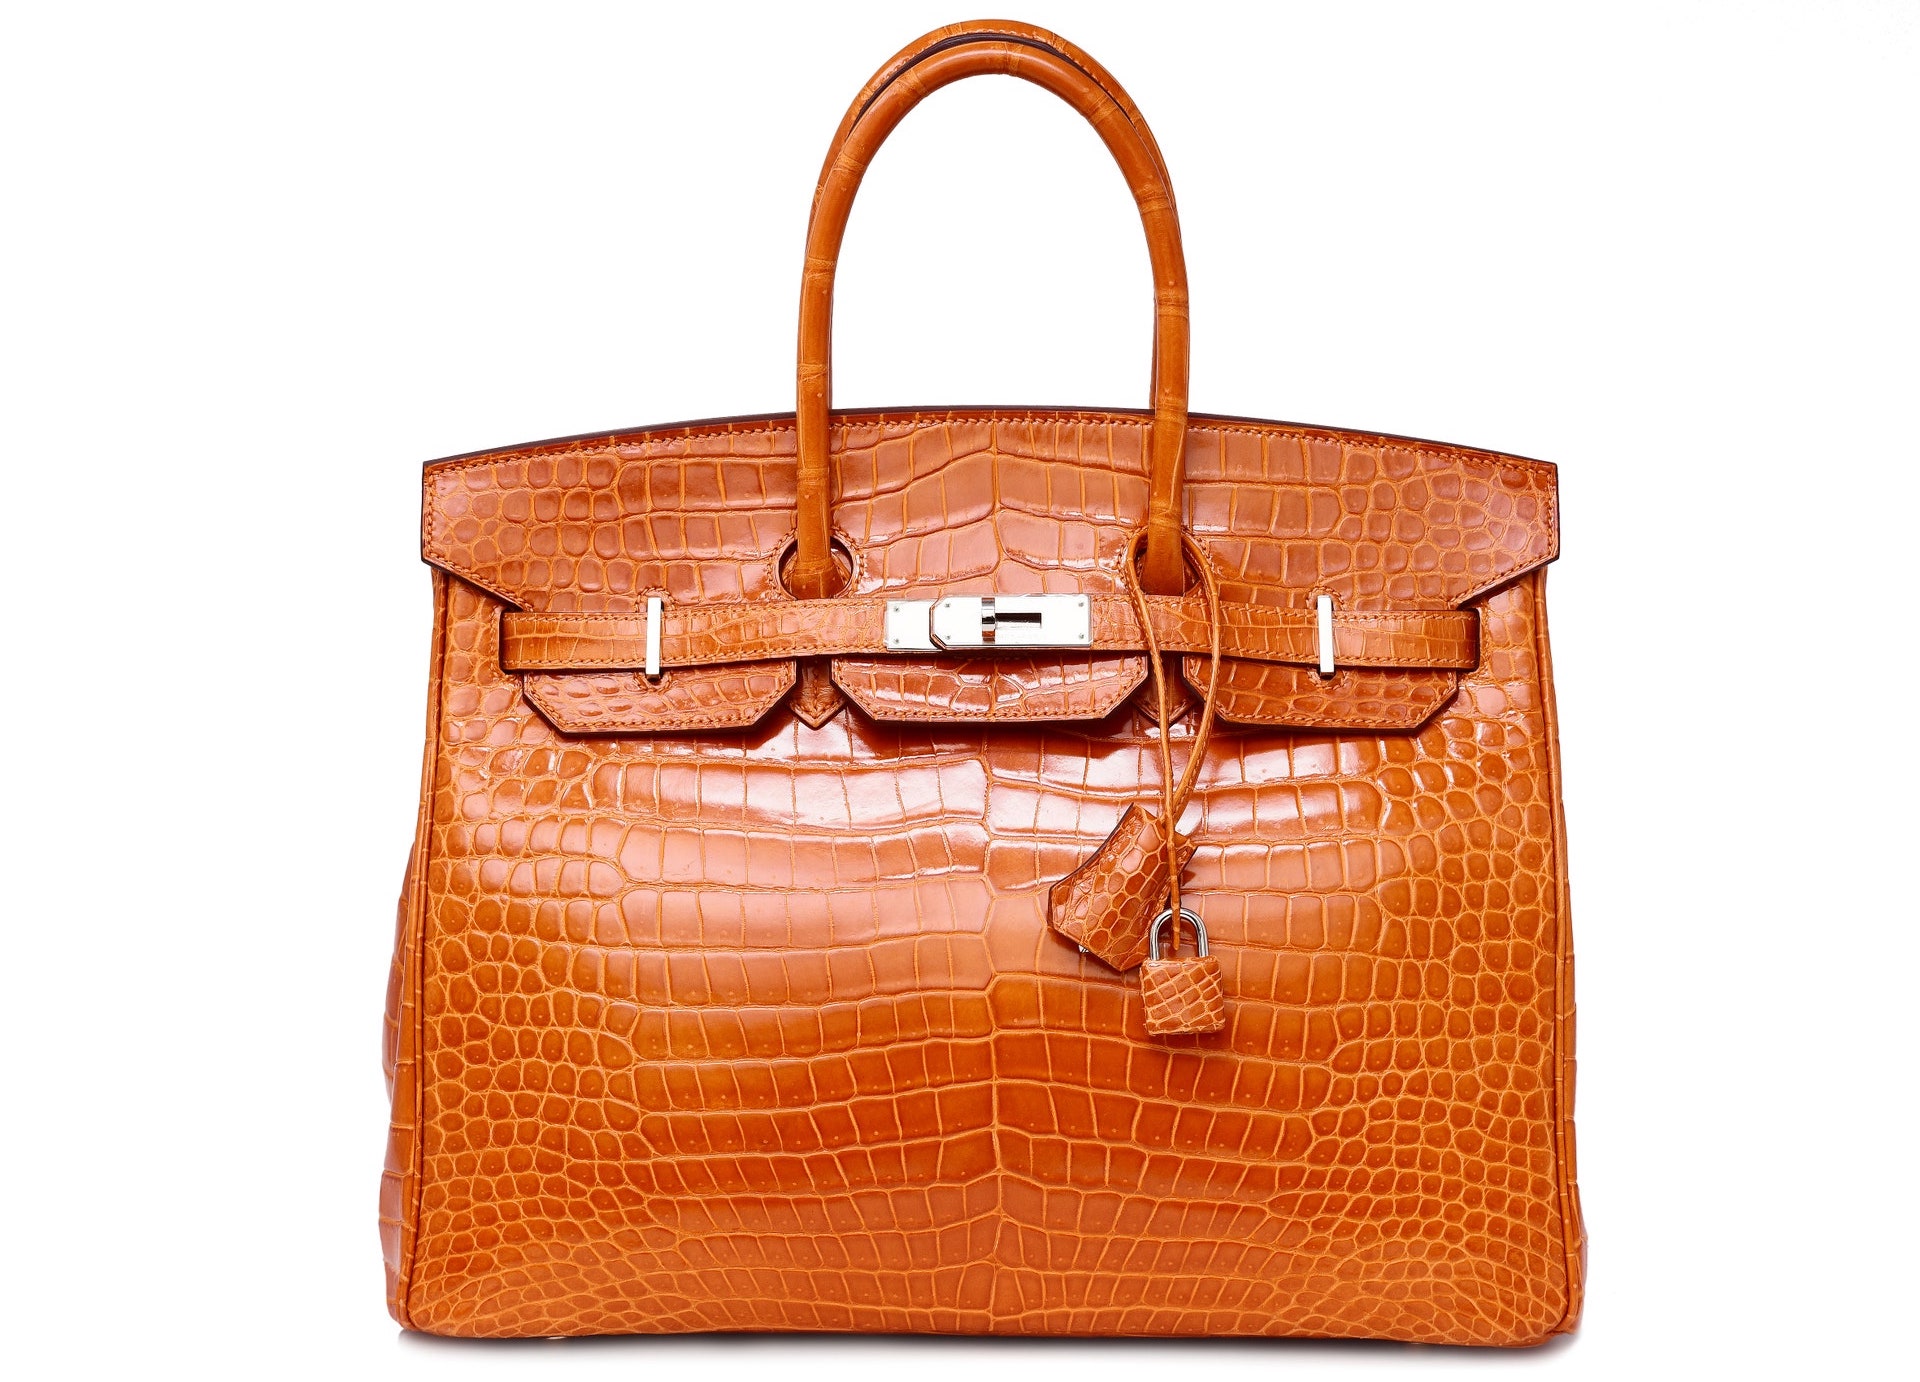 Rare Hermès Birkin bag featuring colourful pop art design is expected to  sell for £30,000 at auction